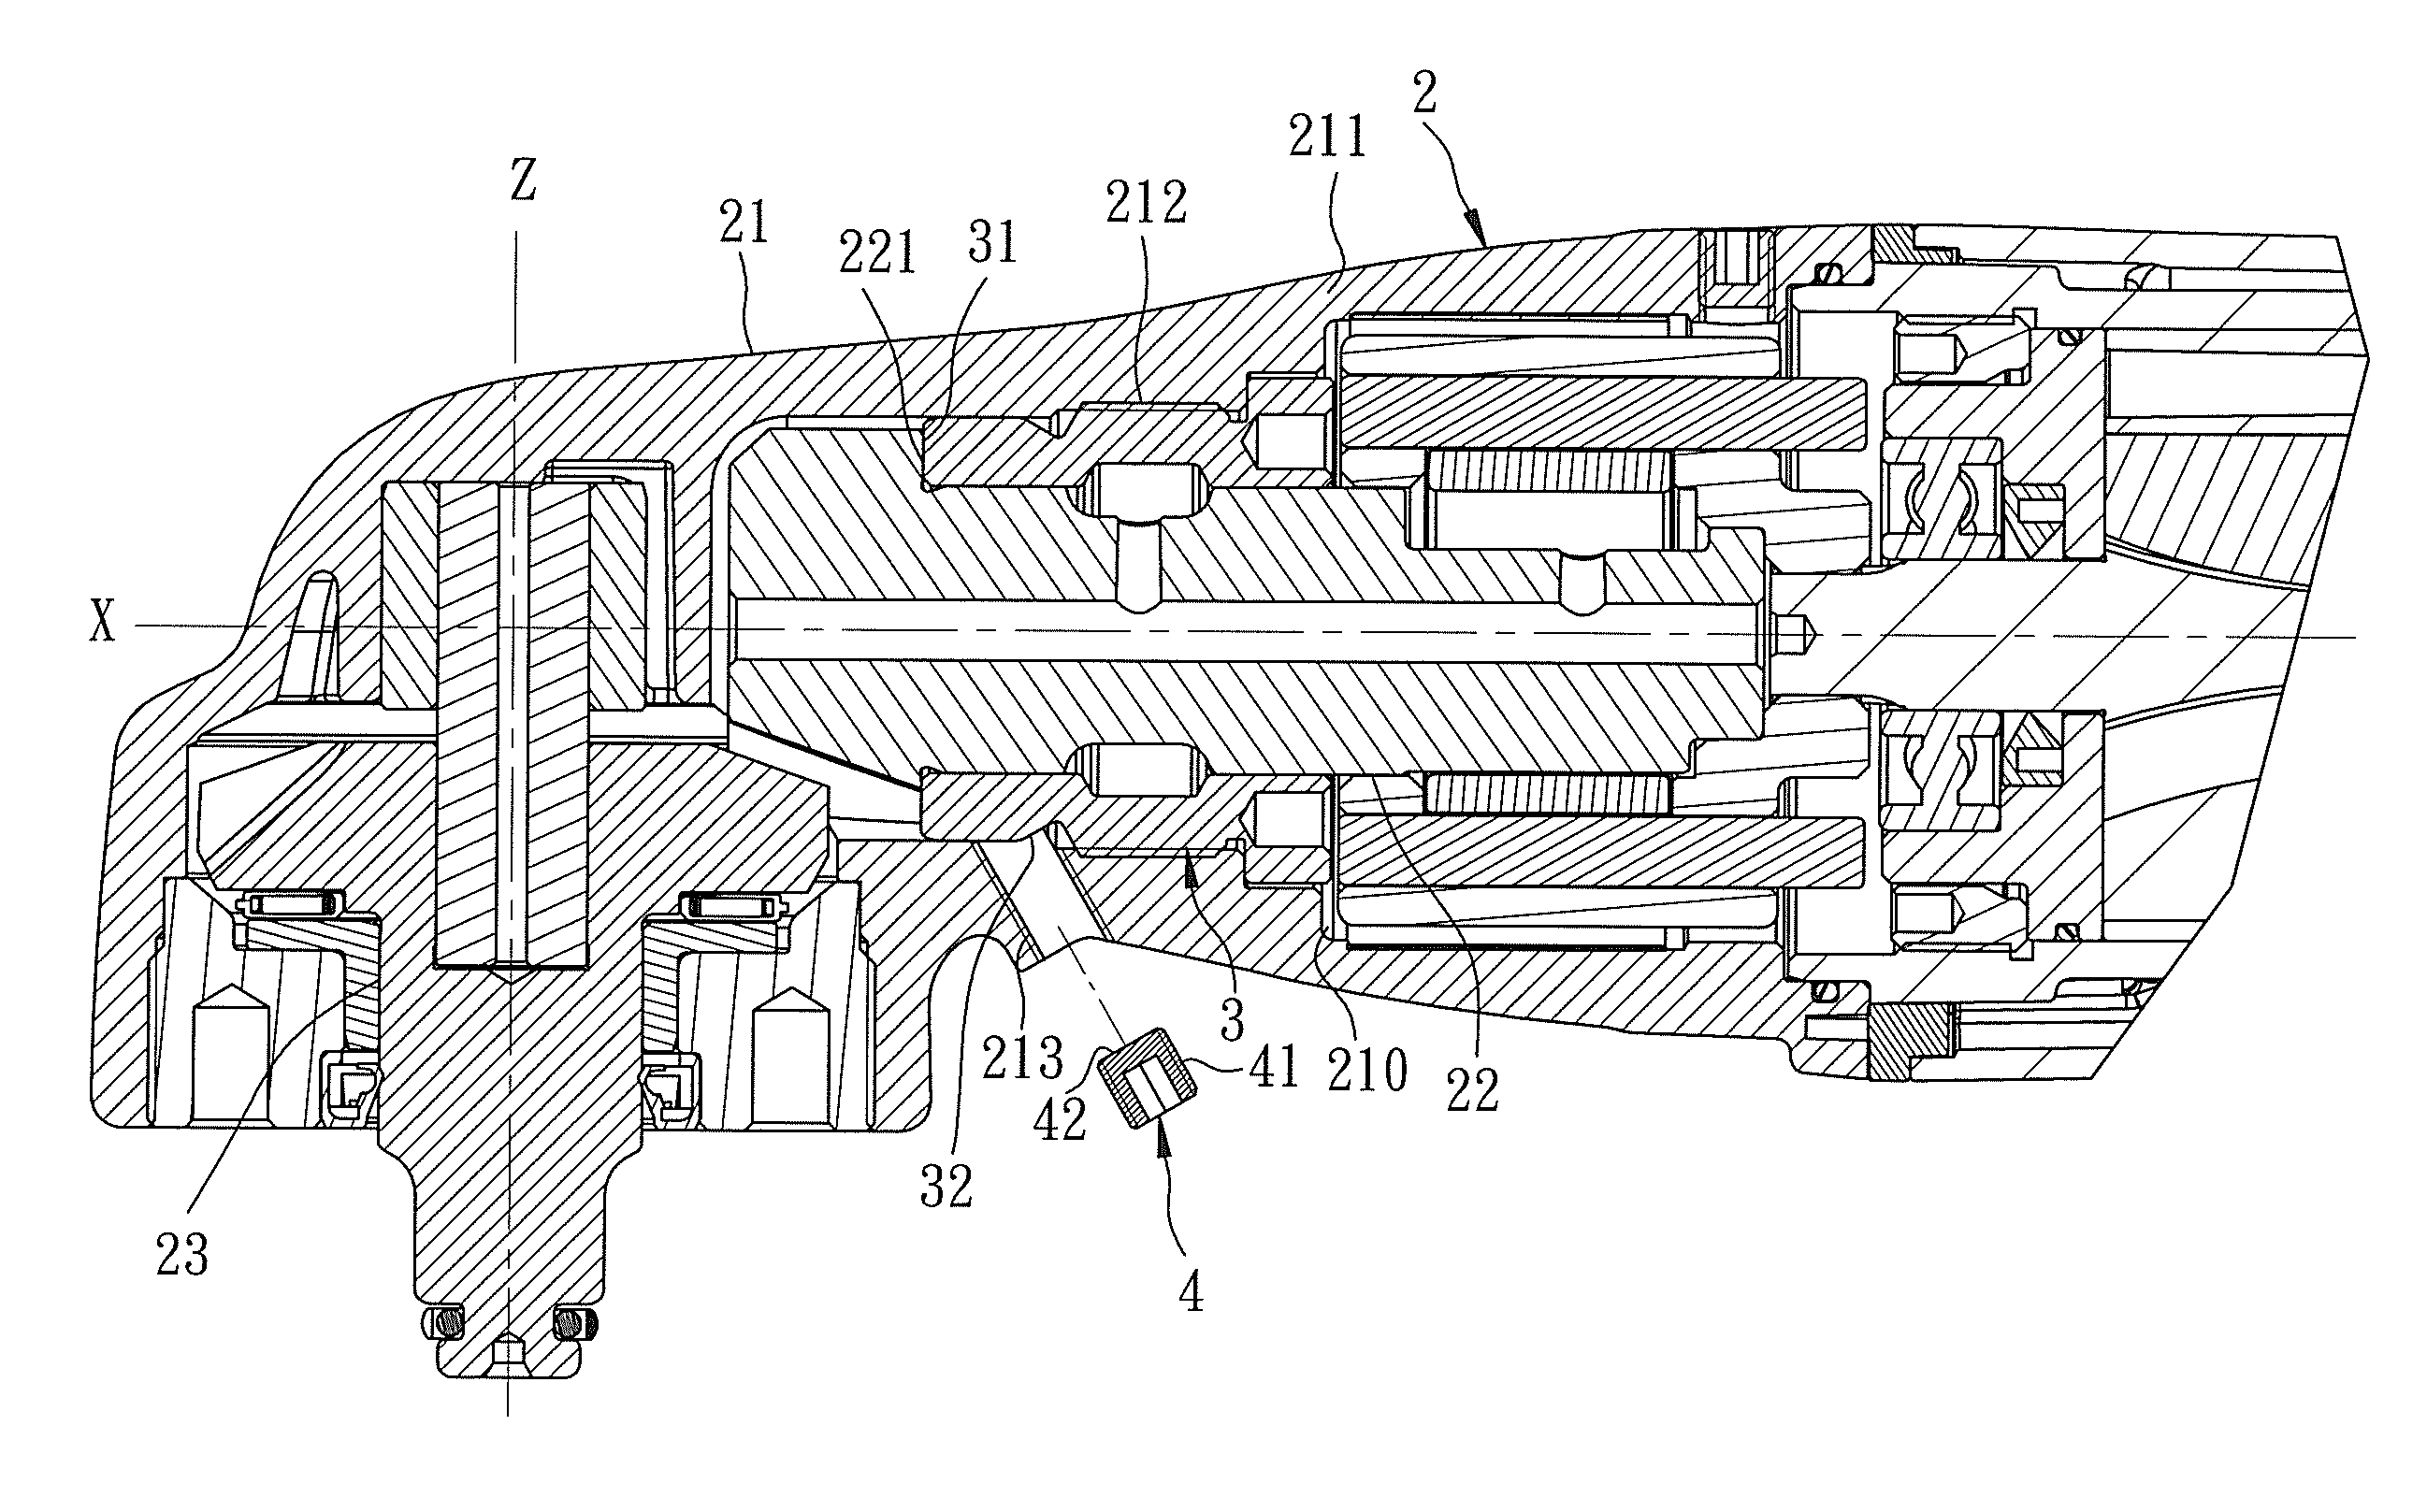 Pneumatic impact tool with a spindle positioning device